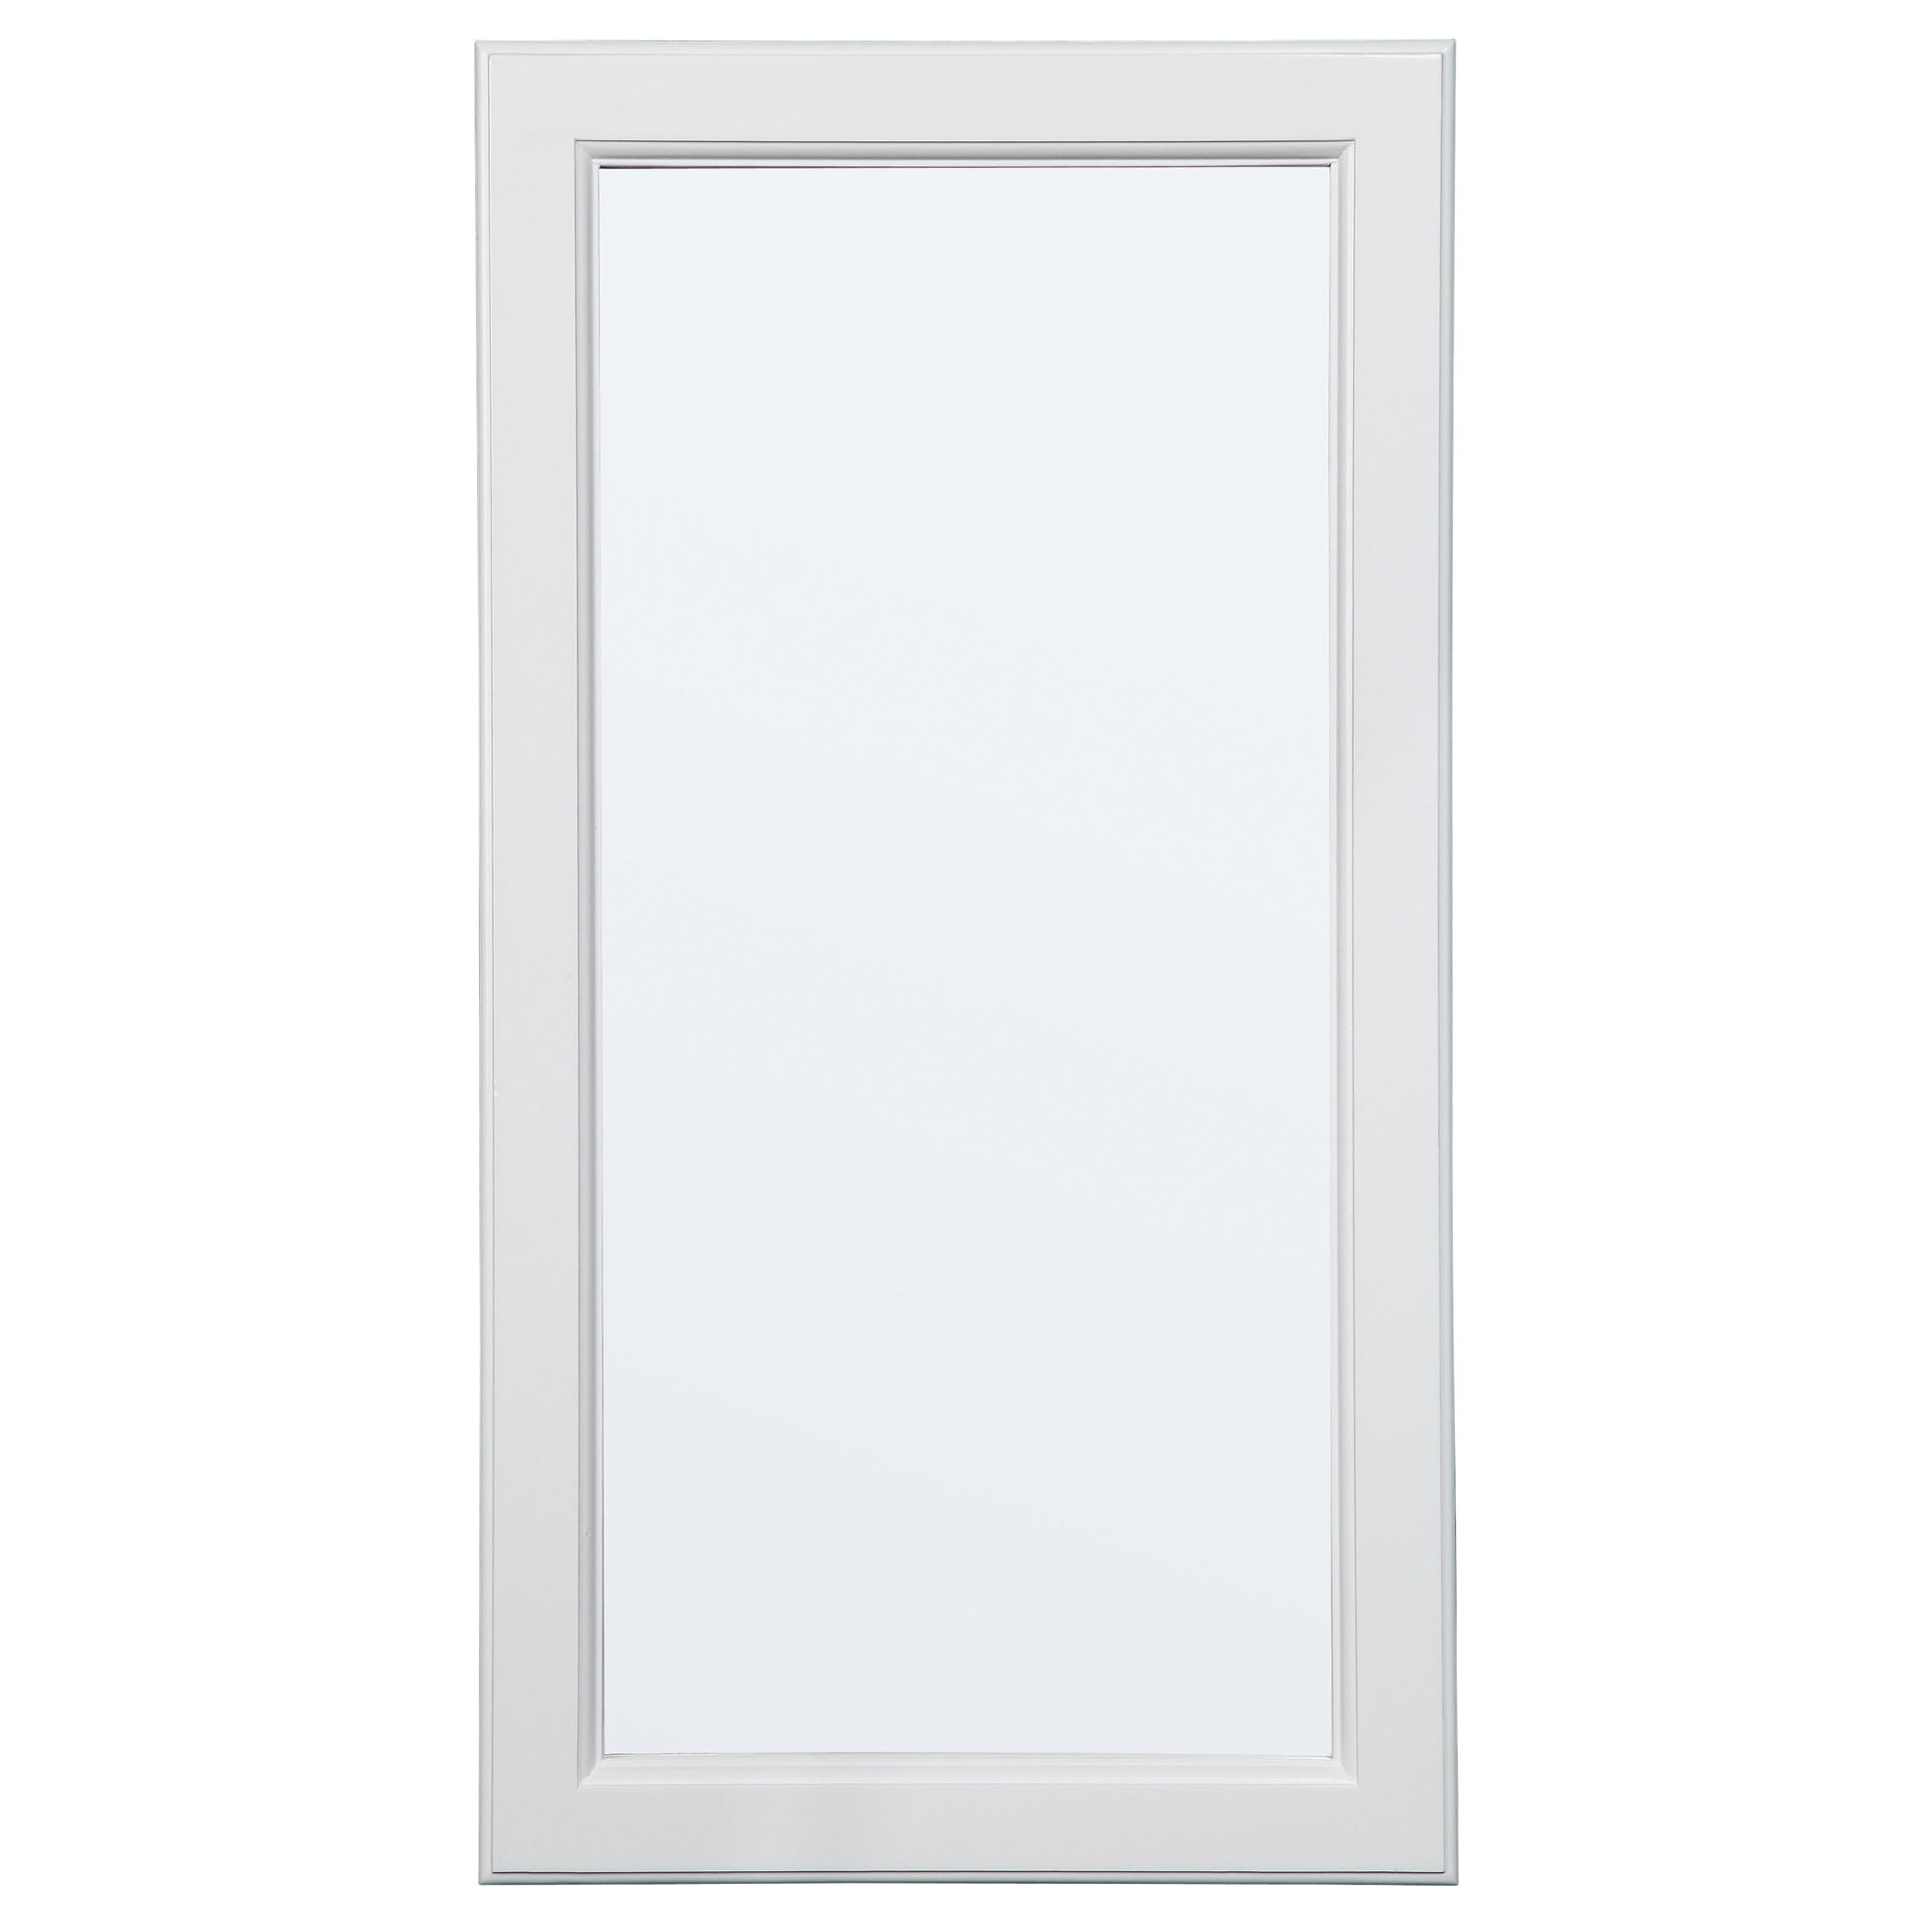 Gardner Glass Products 72-in W x 36-in H White Mdf Transitional Mirror  Frame Kit (Hardware Included in the Mirror Frame Kits department at